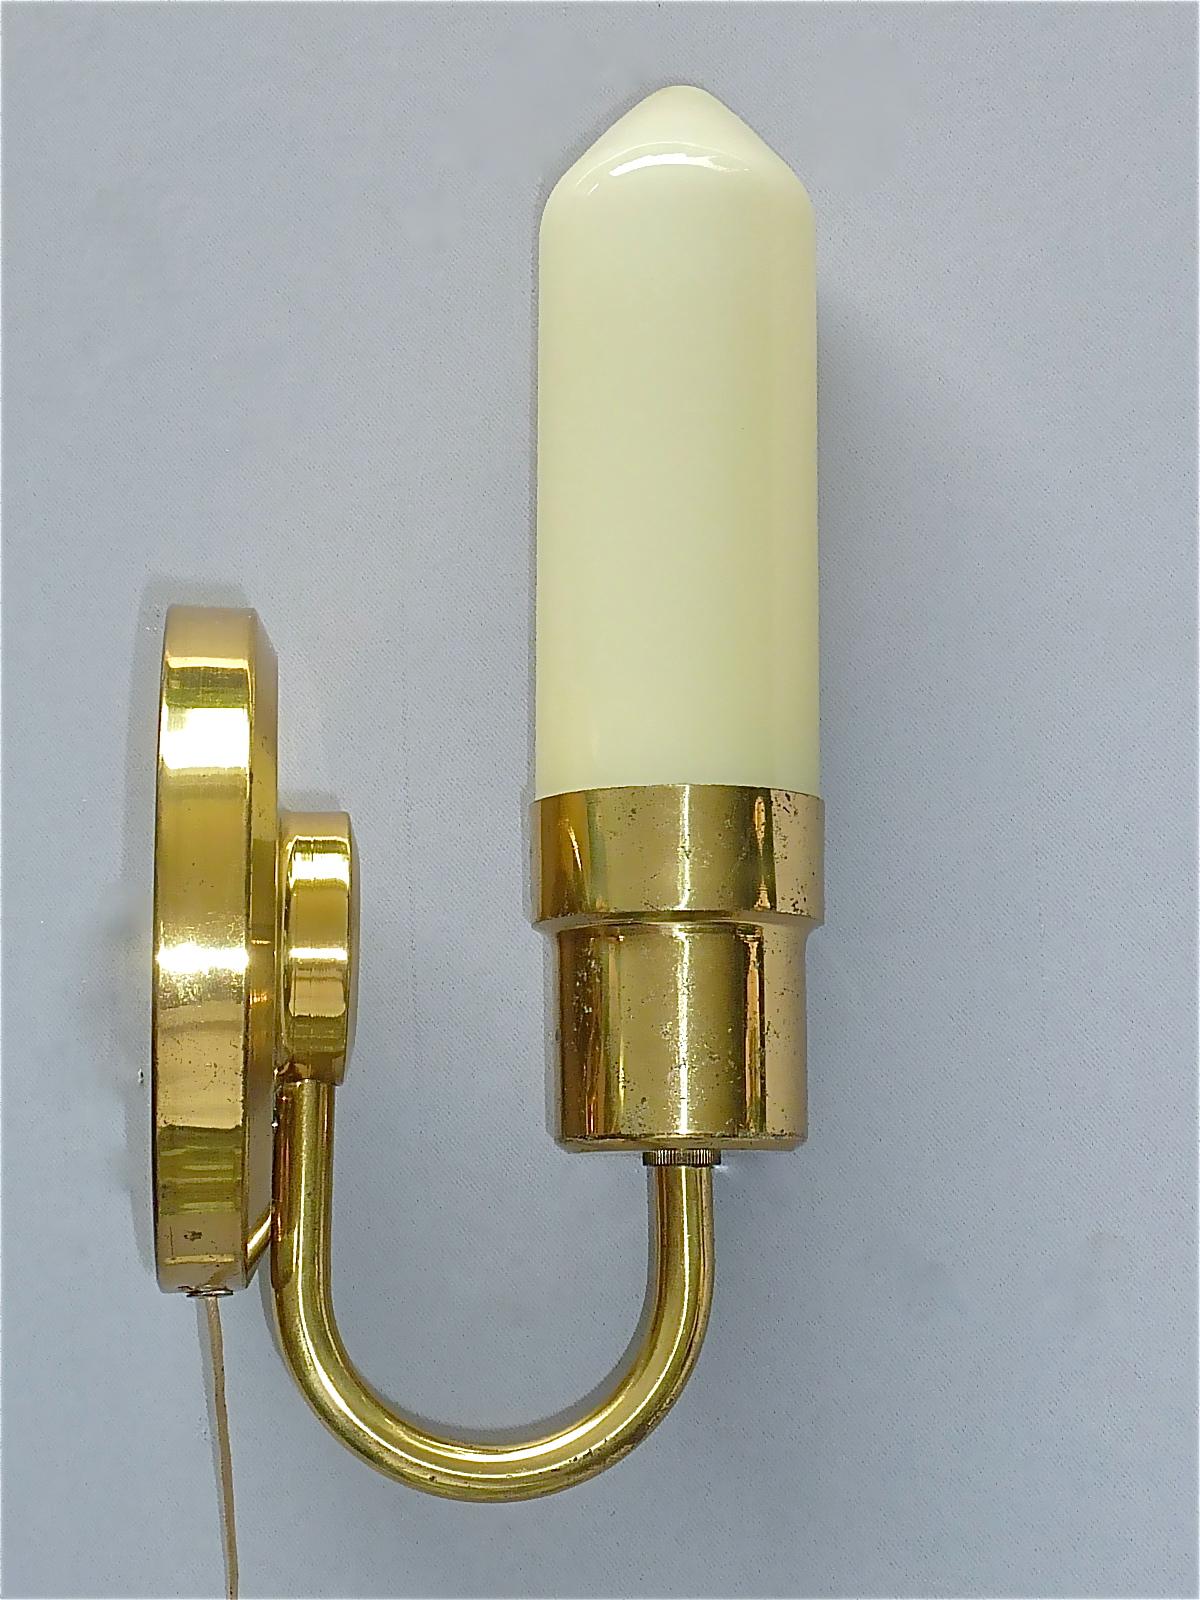 Rare Pair Midcentury Sconces Tynell Style 1950s Yellow Candle Tube Glass Brass For Sale 7